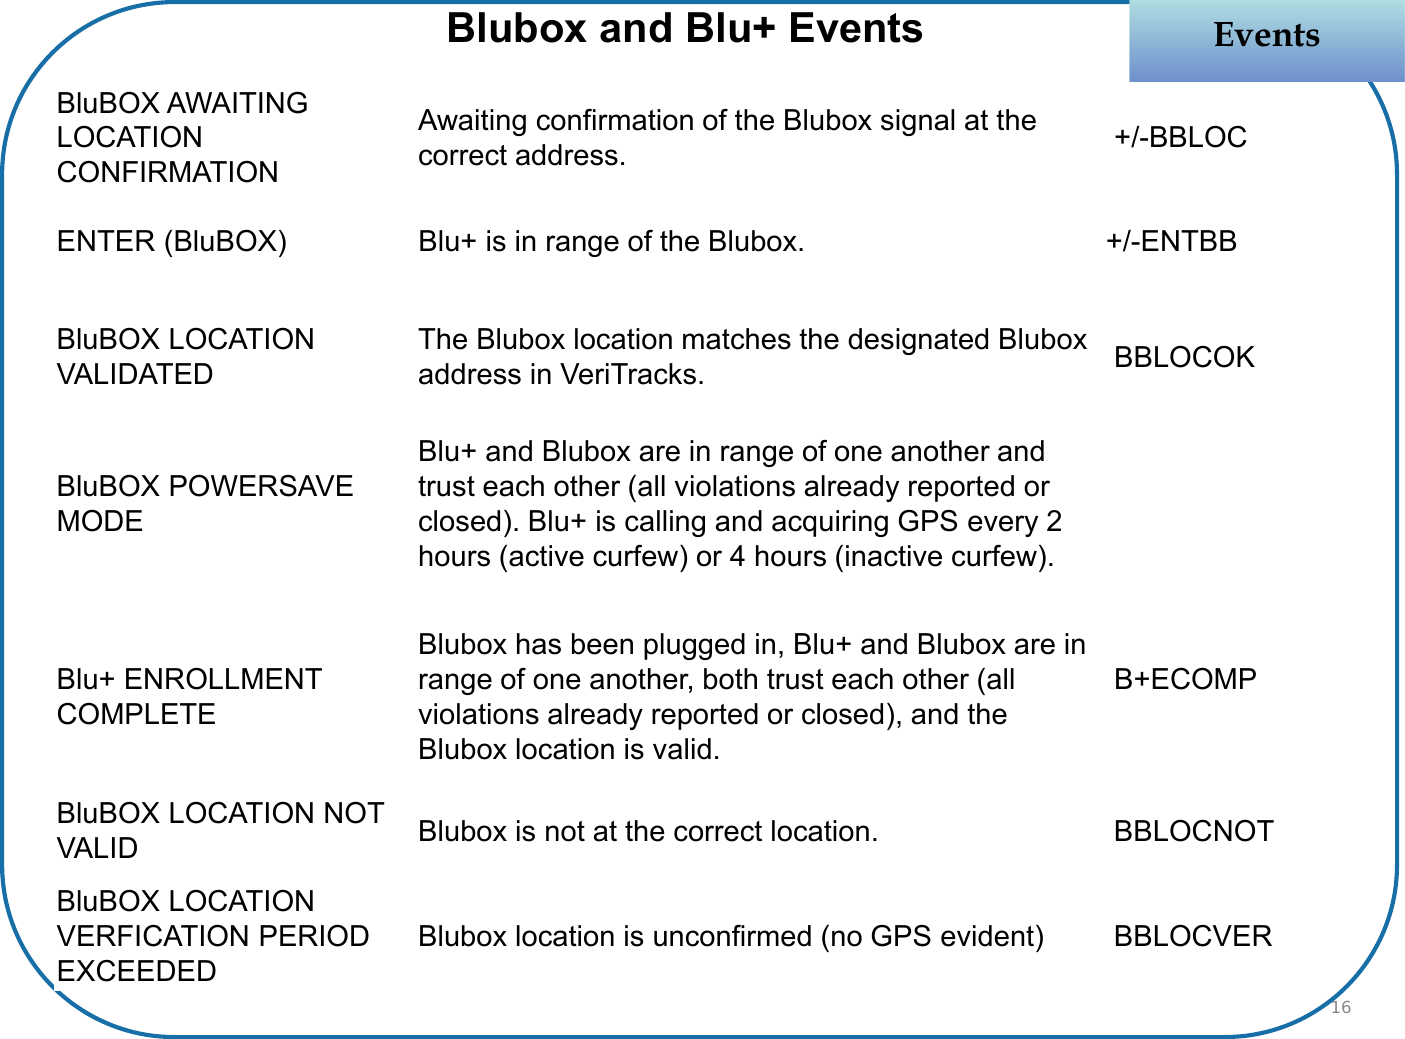 BluBOX AWAITING LOCATION CONFIRMATIONAwaiting confirmation of the Blubox signal at the correct address. +/-BBLOCENTER (BluBOX) Blu+ is in range of the Blubox. +/-ENTBBBluBOX LOCATION VALIDATEDThe Blubox location matches the designated Blubox address in VeriTracks. BBLOCOKBluBOX POWERSAVE MODEBlu+ and Blubox are in range of one another and trust each other (all violations already reported or closed). Blu+ is calling and acquiring GPS every 2 hours (active curfew) or 4 hours (inactive curfew). Blu+ ENROLLMENT COMPLETEBlubox has been plugged in, Blu+ and Blubox are in range of one another, both trust each other (all violations already reported or closed), and the Blubox location is valid.B+ECOMPBluBOX LOCATION NOT VALID Blubox is not at the correct location. BBLOCNOTBluBOX LOCATION VERFICATION PERIOD EXCEEDEDBlubox location is unconfirmed (no GPS evident) BBLOCVEREventsEventsBlubox and Blu+ Events16